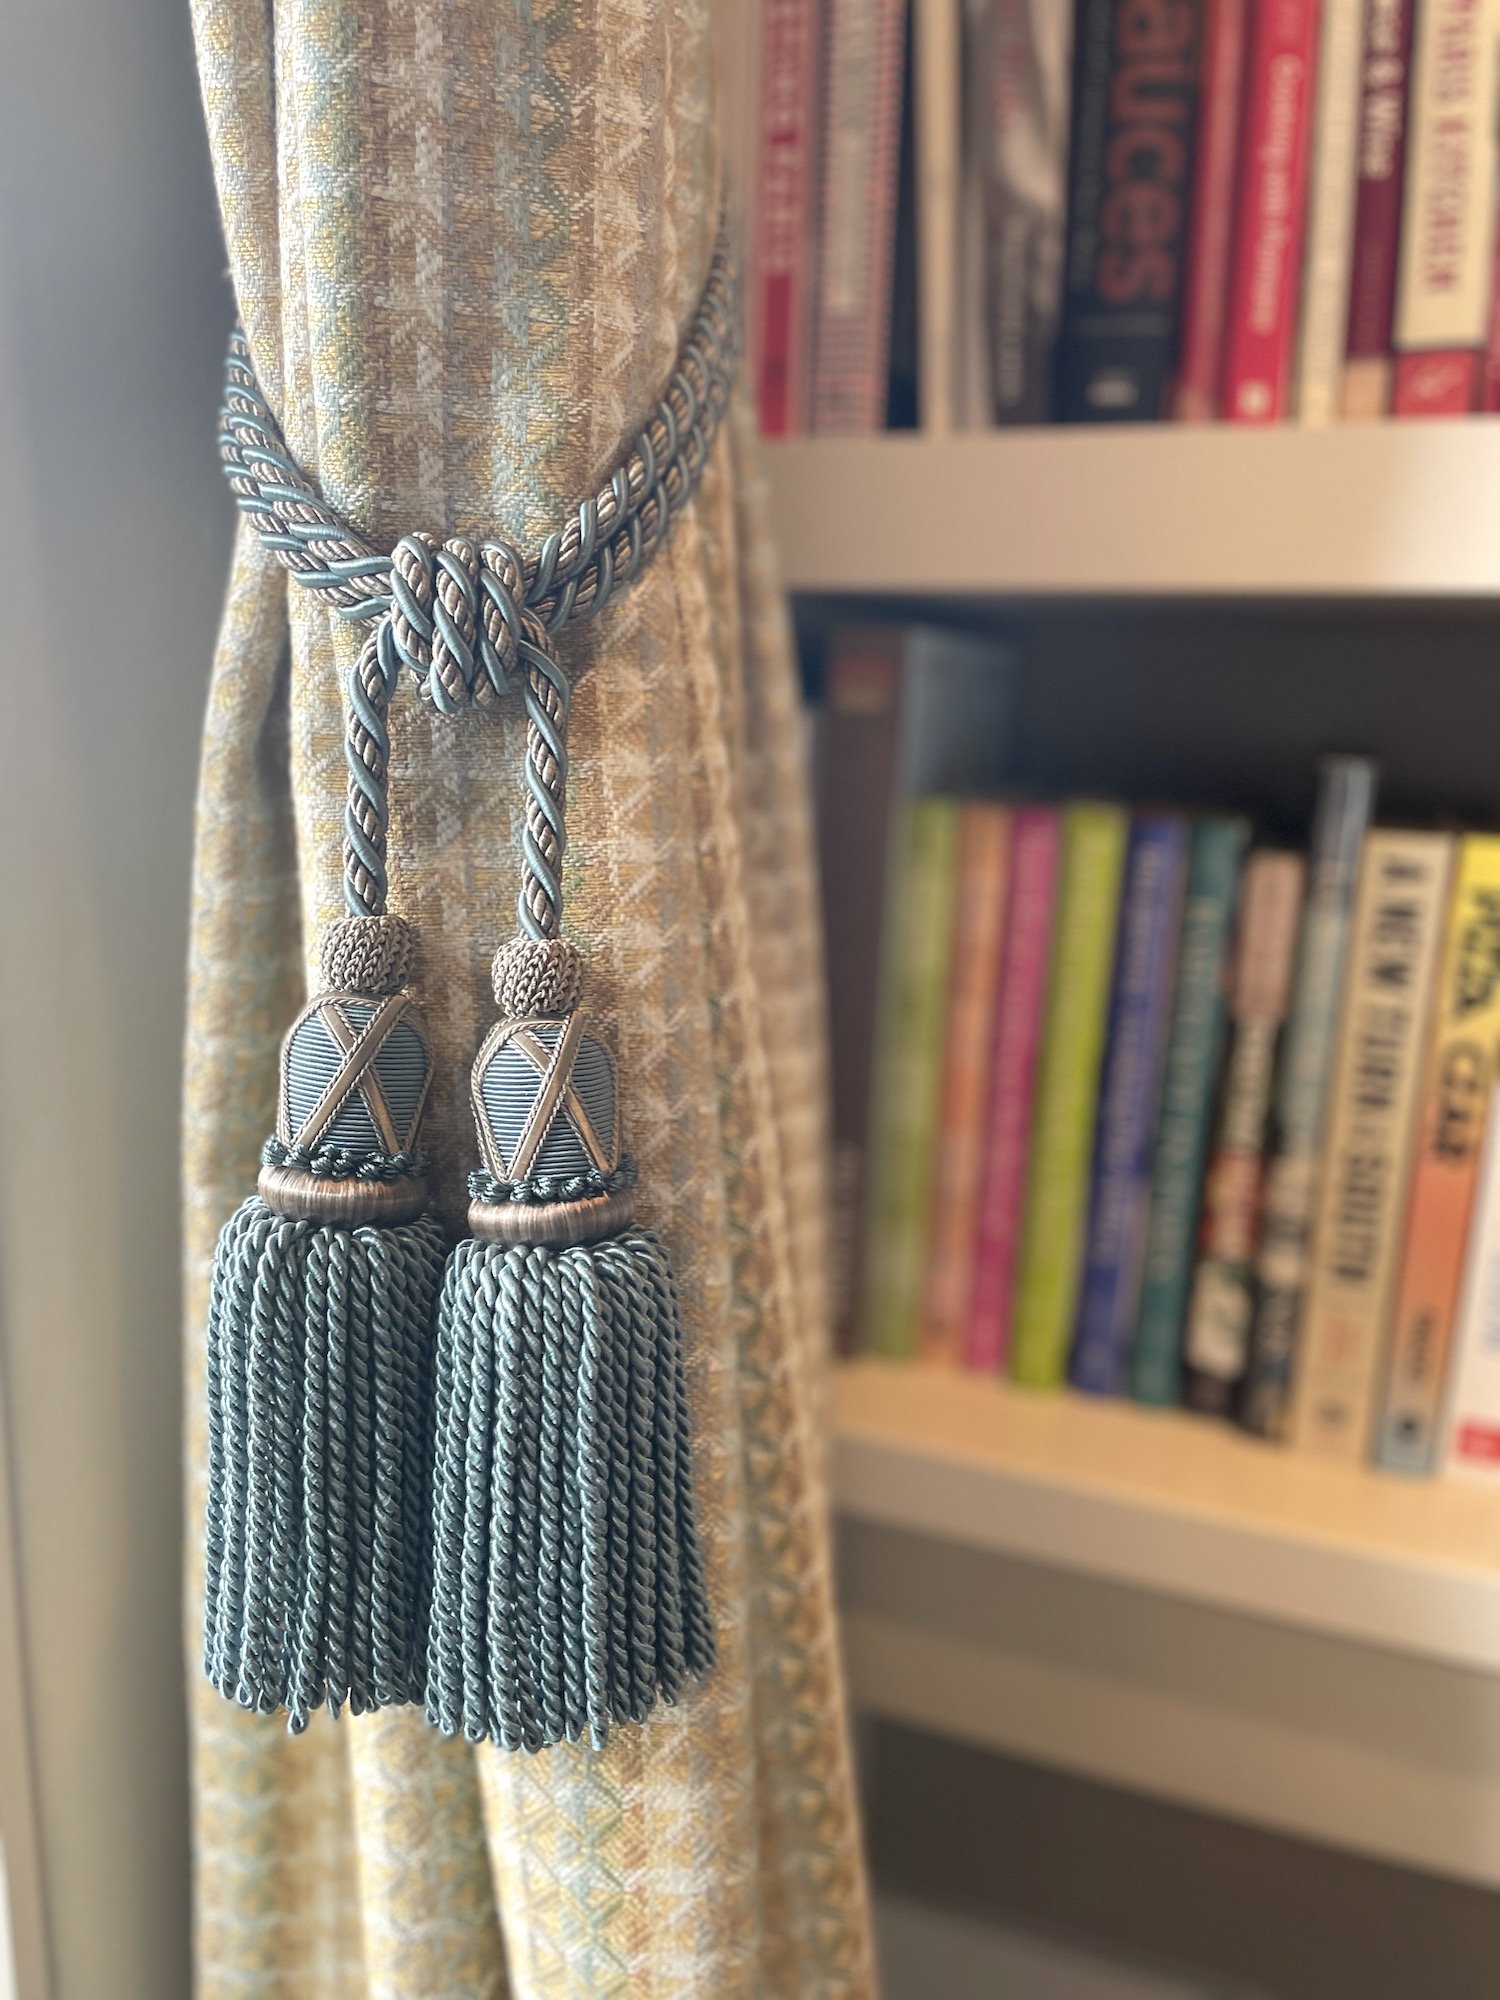 6 Reasons to Add French Tassels and Tie-Backs to Your Décor